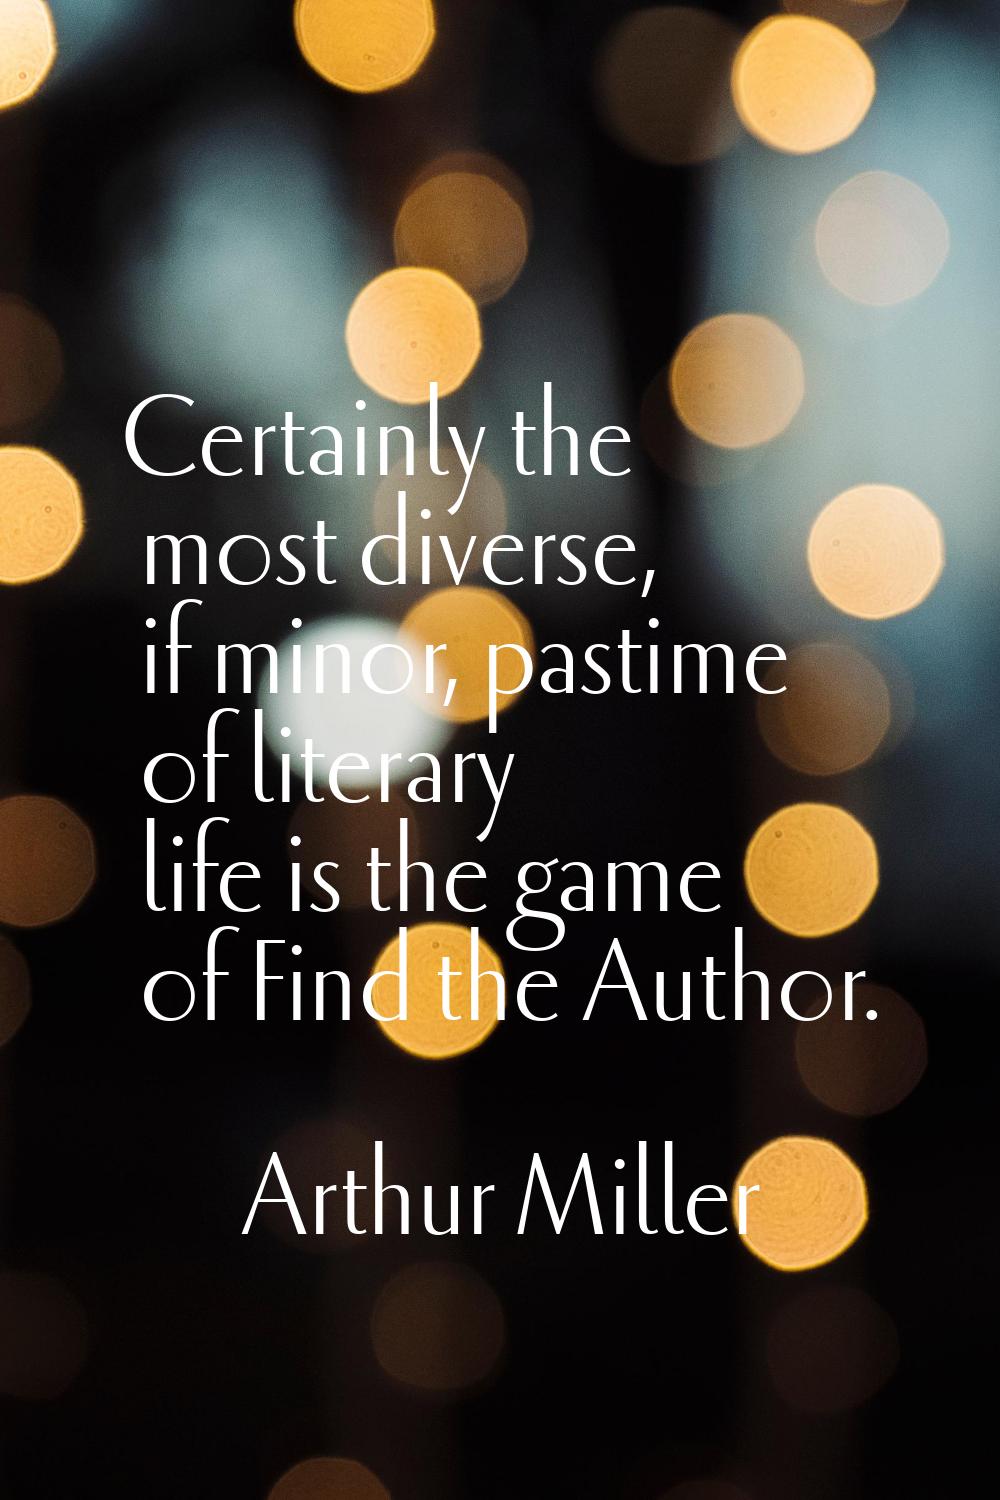 Certainly the most diverse, if minor, pastime of literary life is the game of Find the Author.